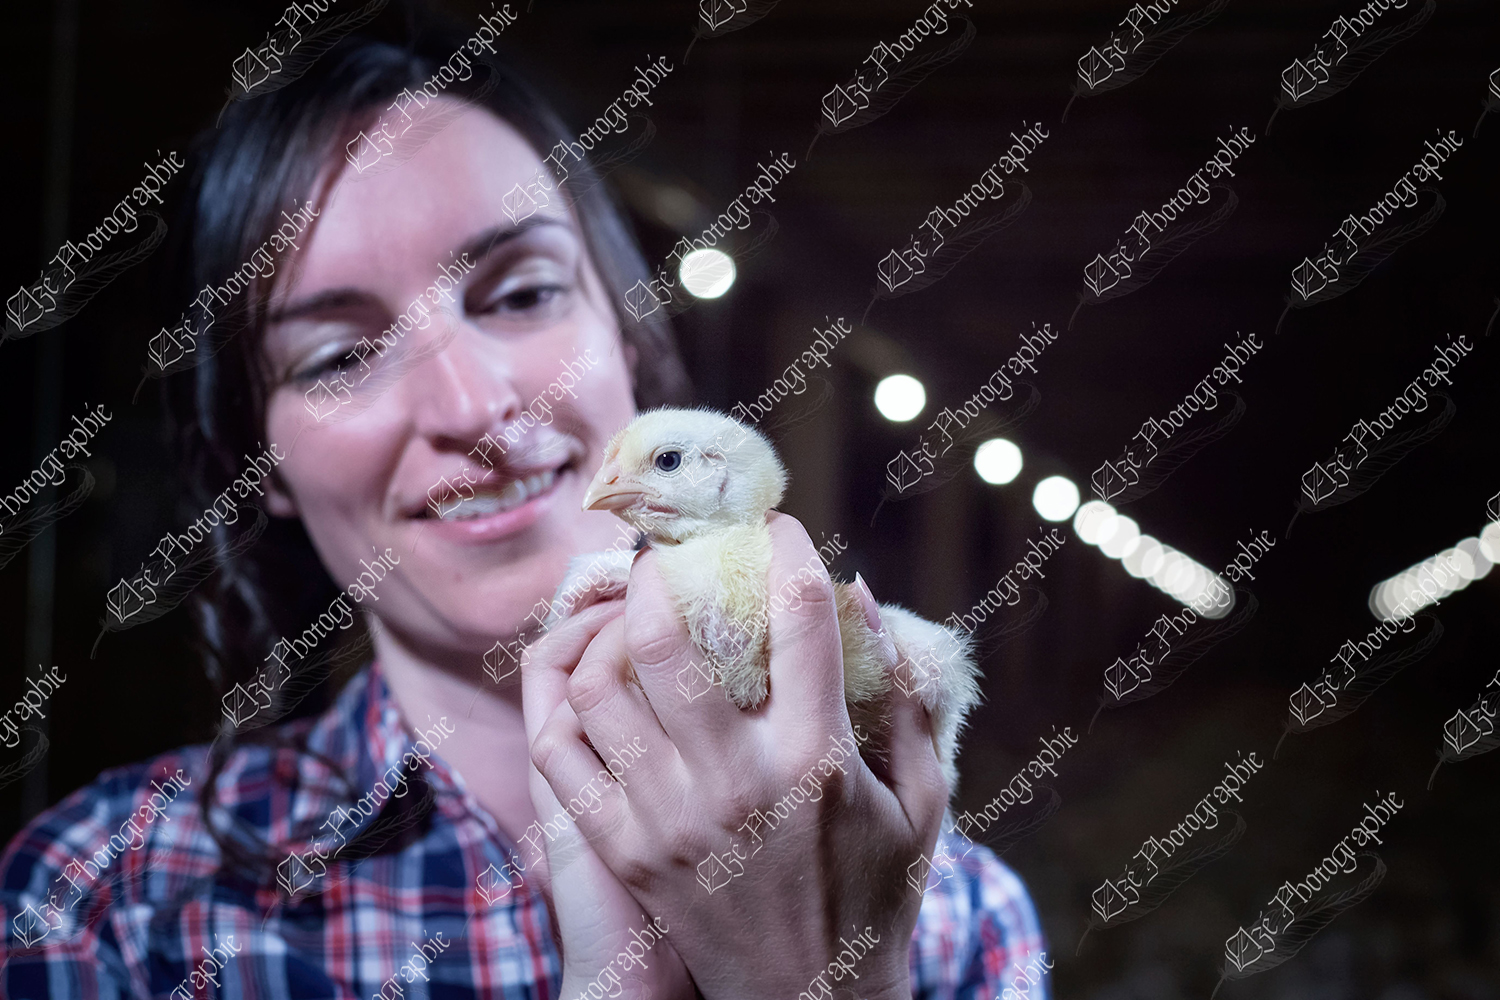 elze_photo_9158_ferme_avicole_volaille_young_chick_lights